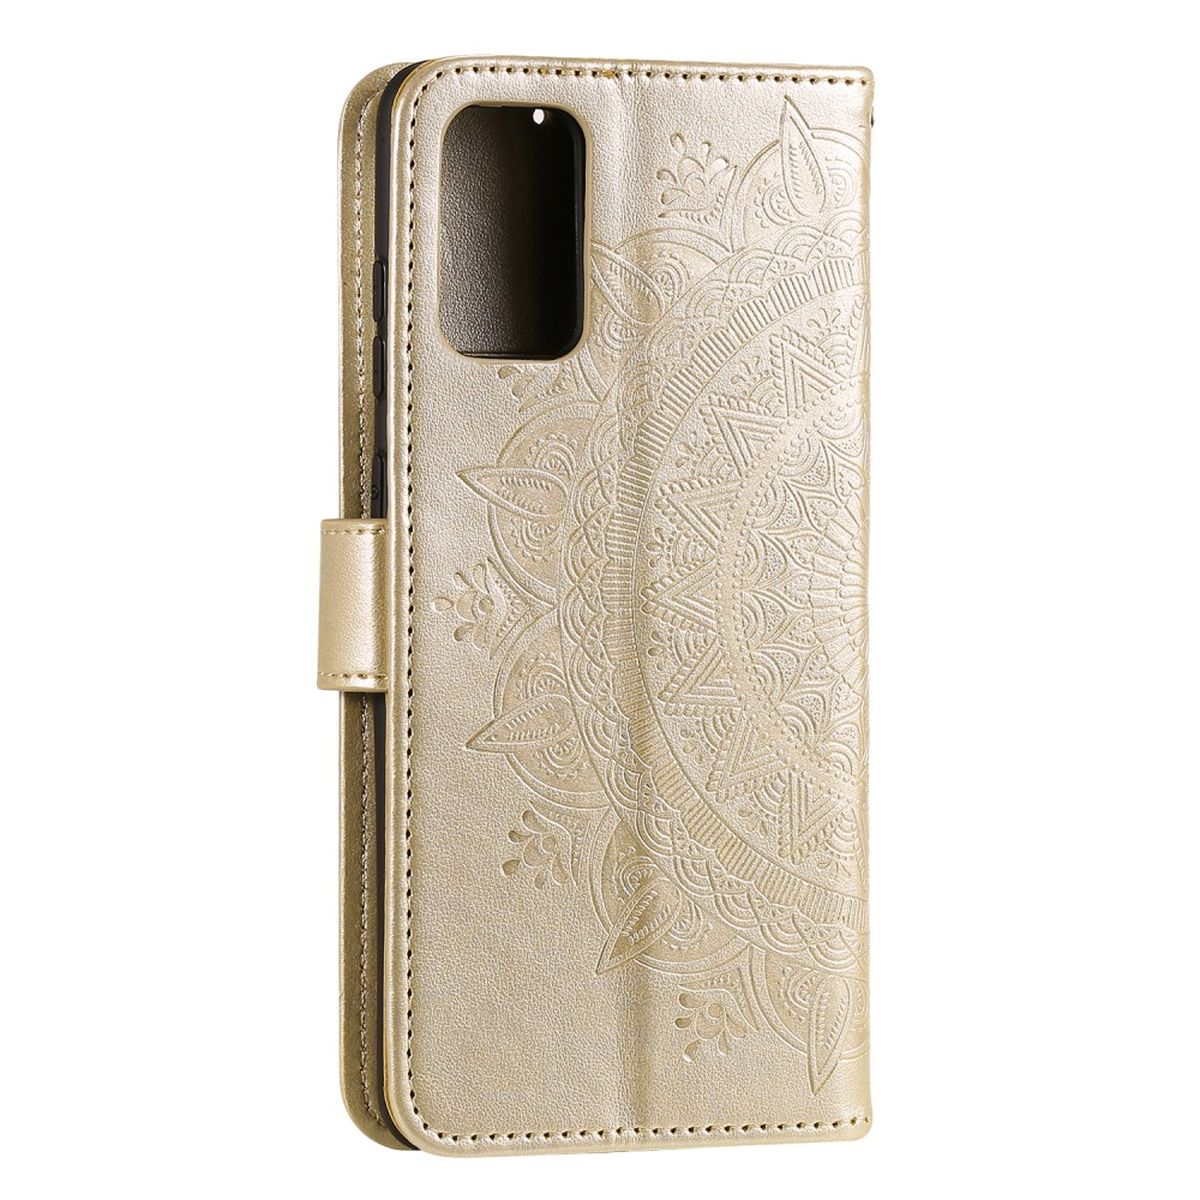 Samsung, Mandala Klapphülle Muster, Bookcover, A33 mit Gold COVERKINGZ Galaxy 5G,